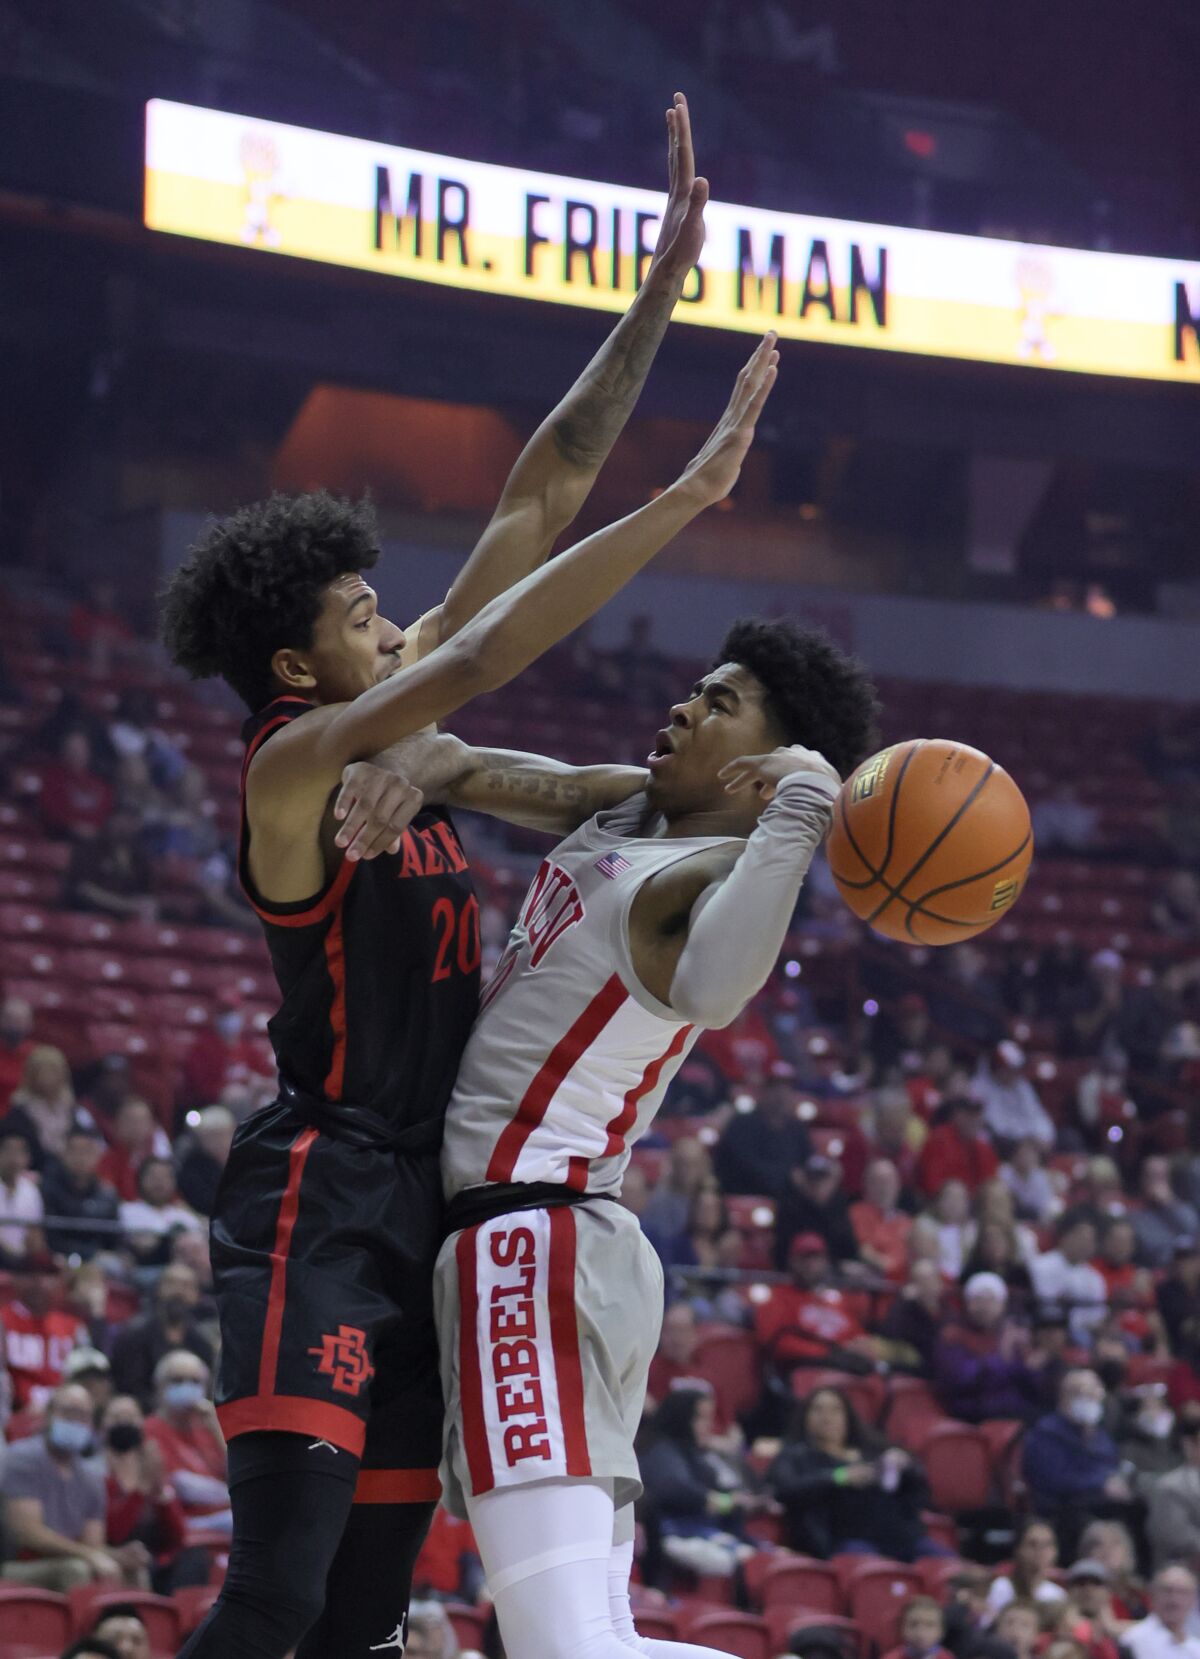 Keshon Gilbert of UNLV loses the ball as he drives to the basket against Chad Baker-Mazara of San Diego State.